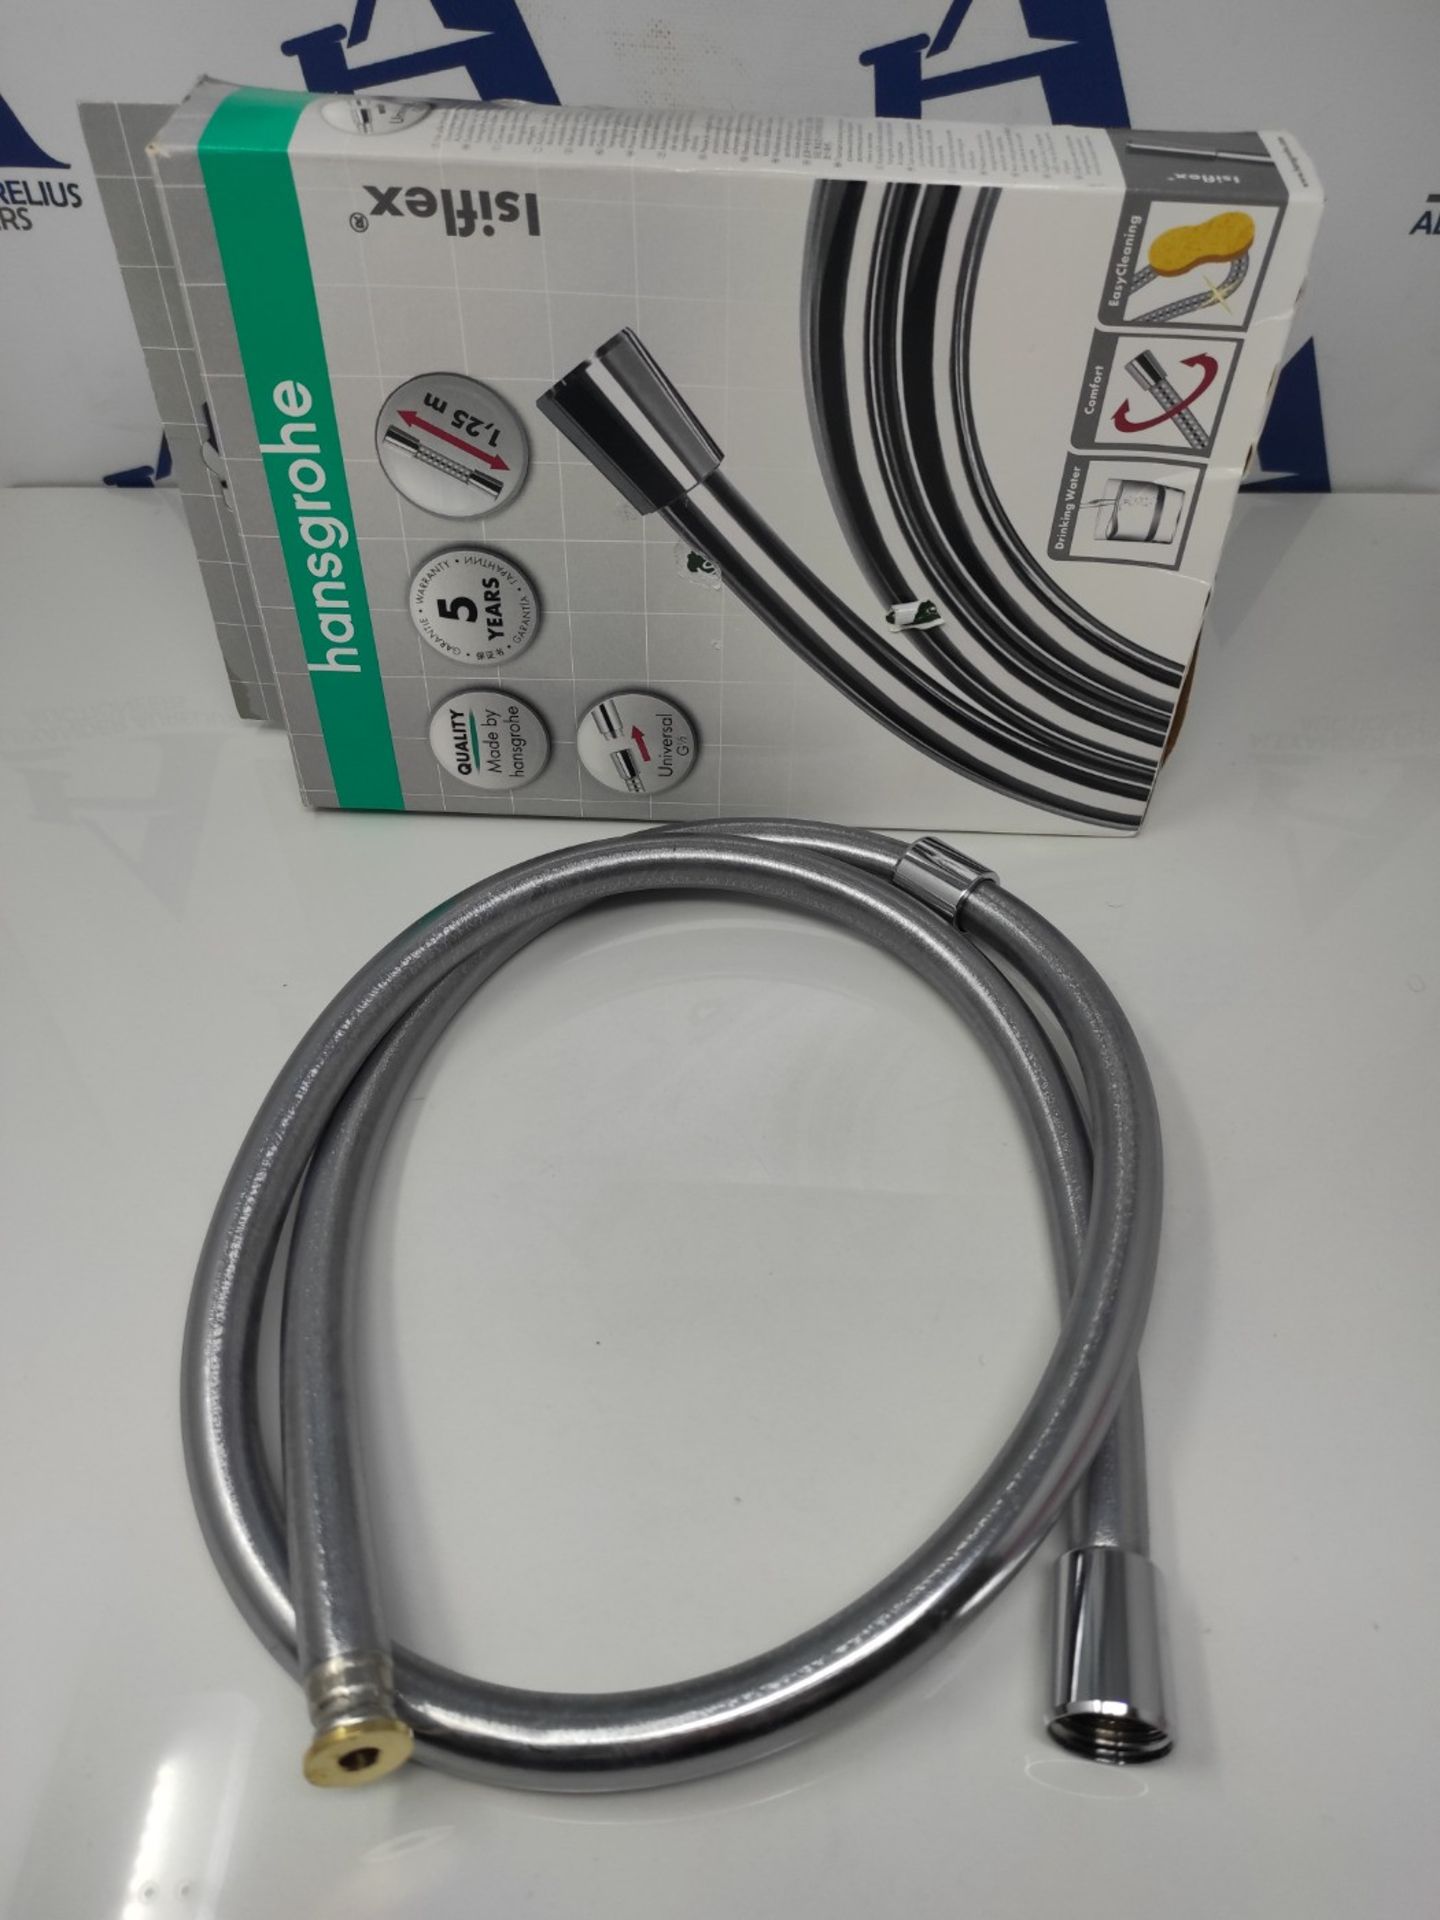 hansgrohe Isiflex Shower Hose 1,25 m, Anti-kink and Tangle free, Chrome, 28272000 - Image 2 of 2